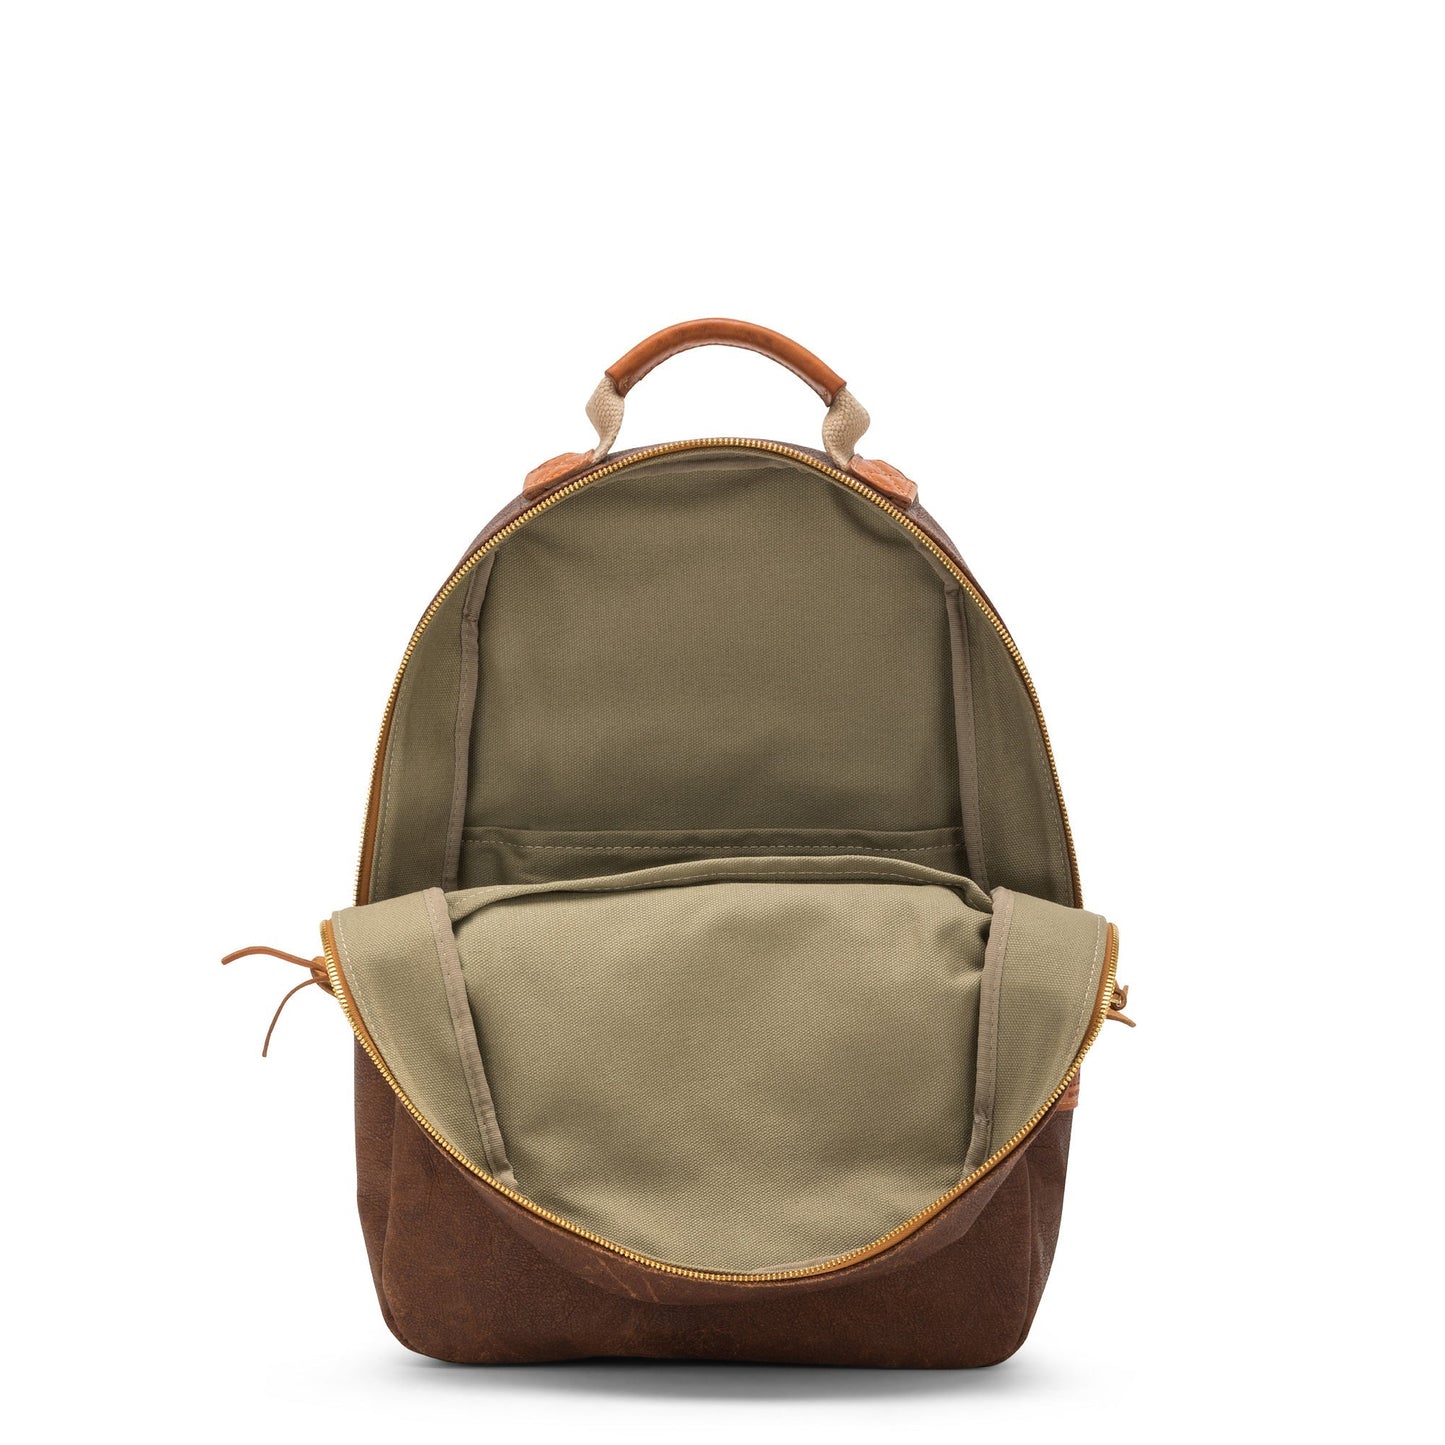 A washable paper oval shaped backpack is shown from the front angle, unzipped and open. It reveals two inner pockets in a cotton lining. The backpack is brown in colour.